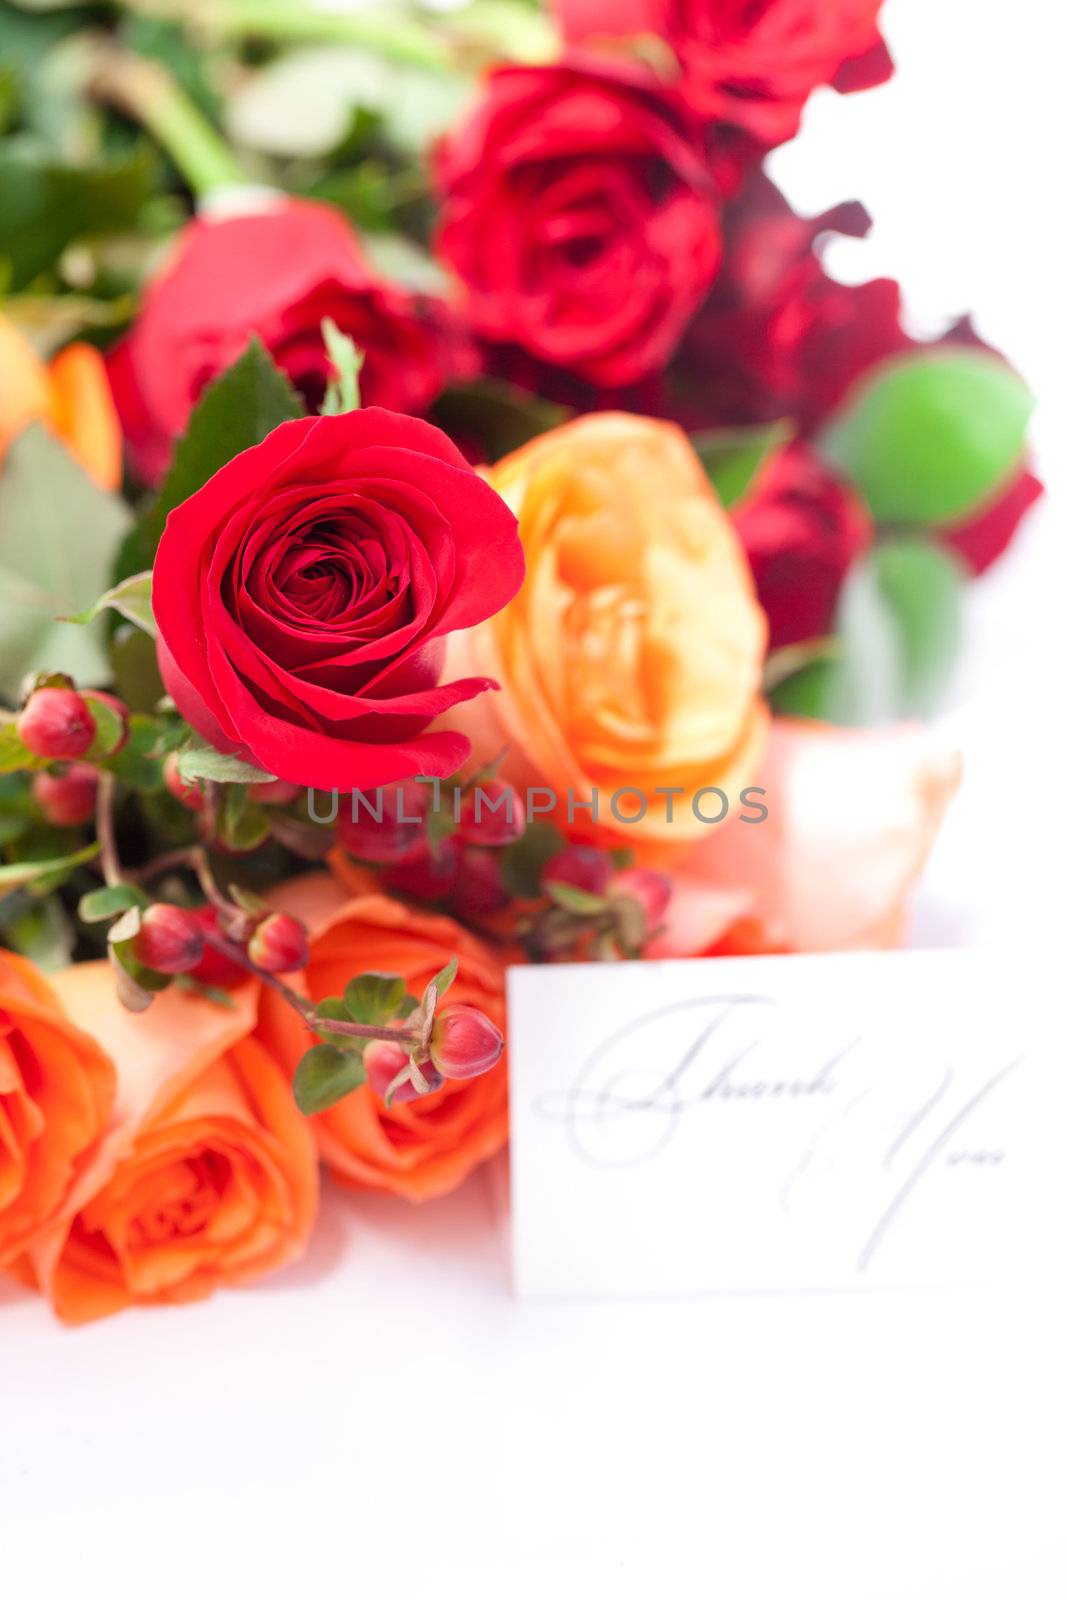 bouquet of colorful roses and a card with the words thank you by jannyjus